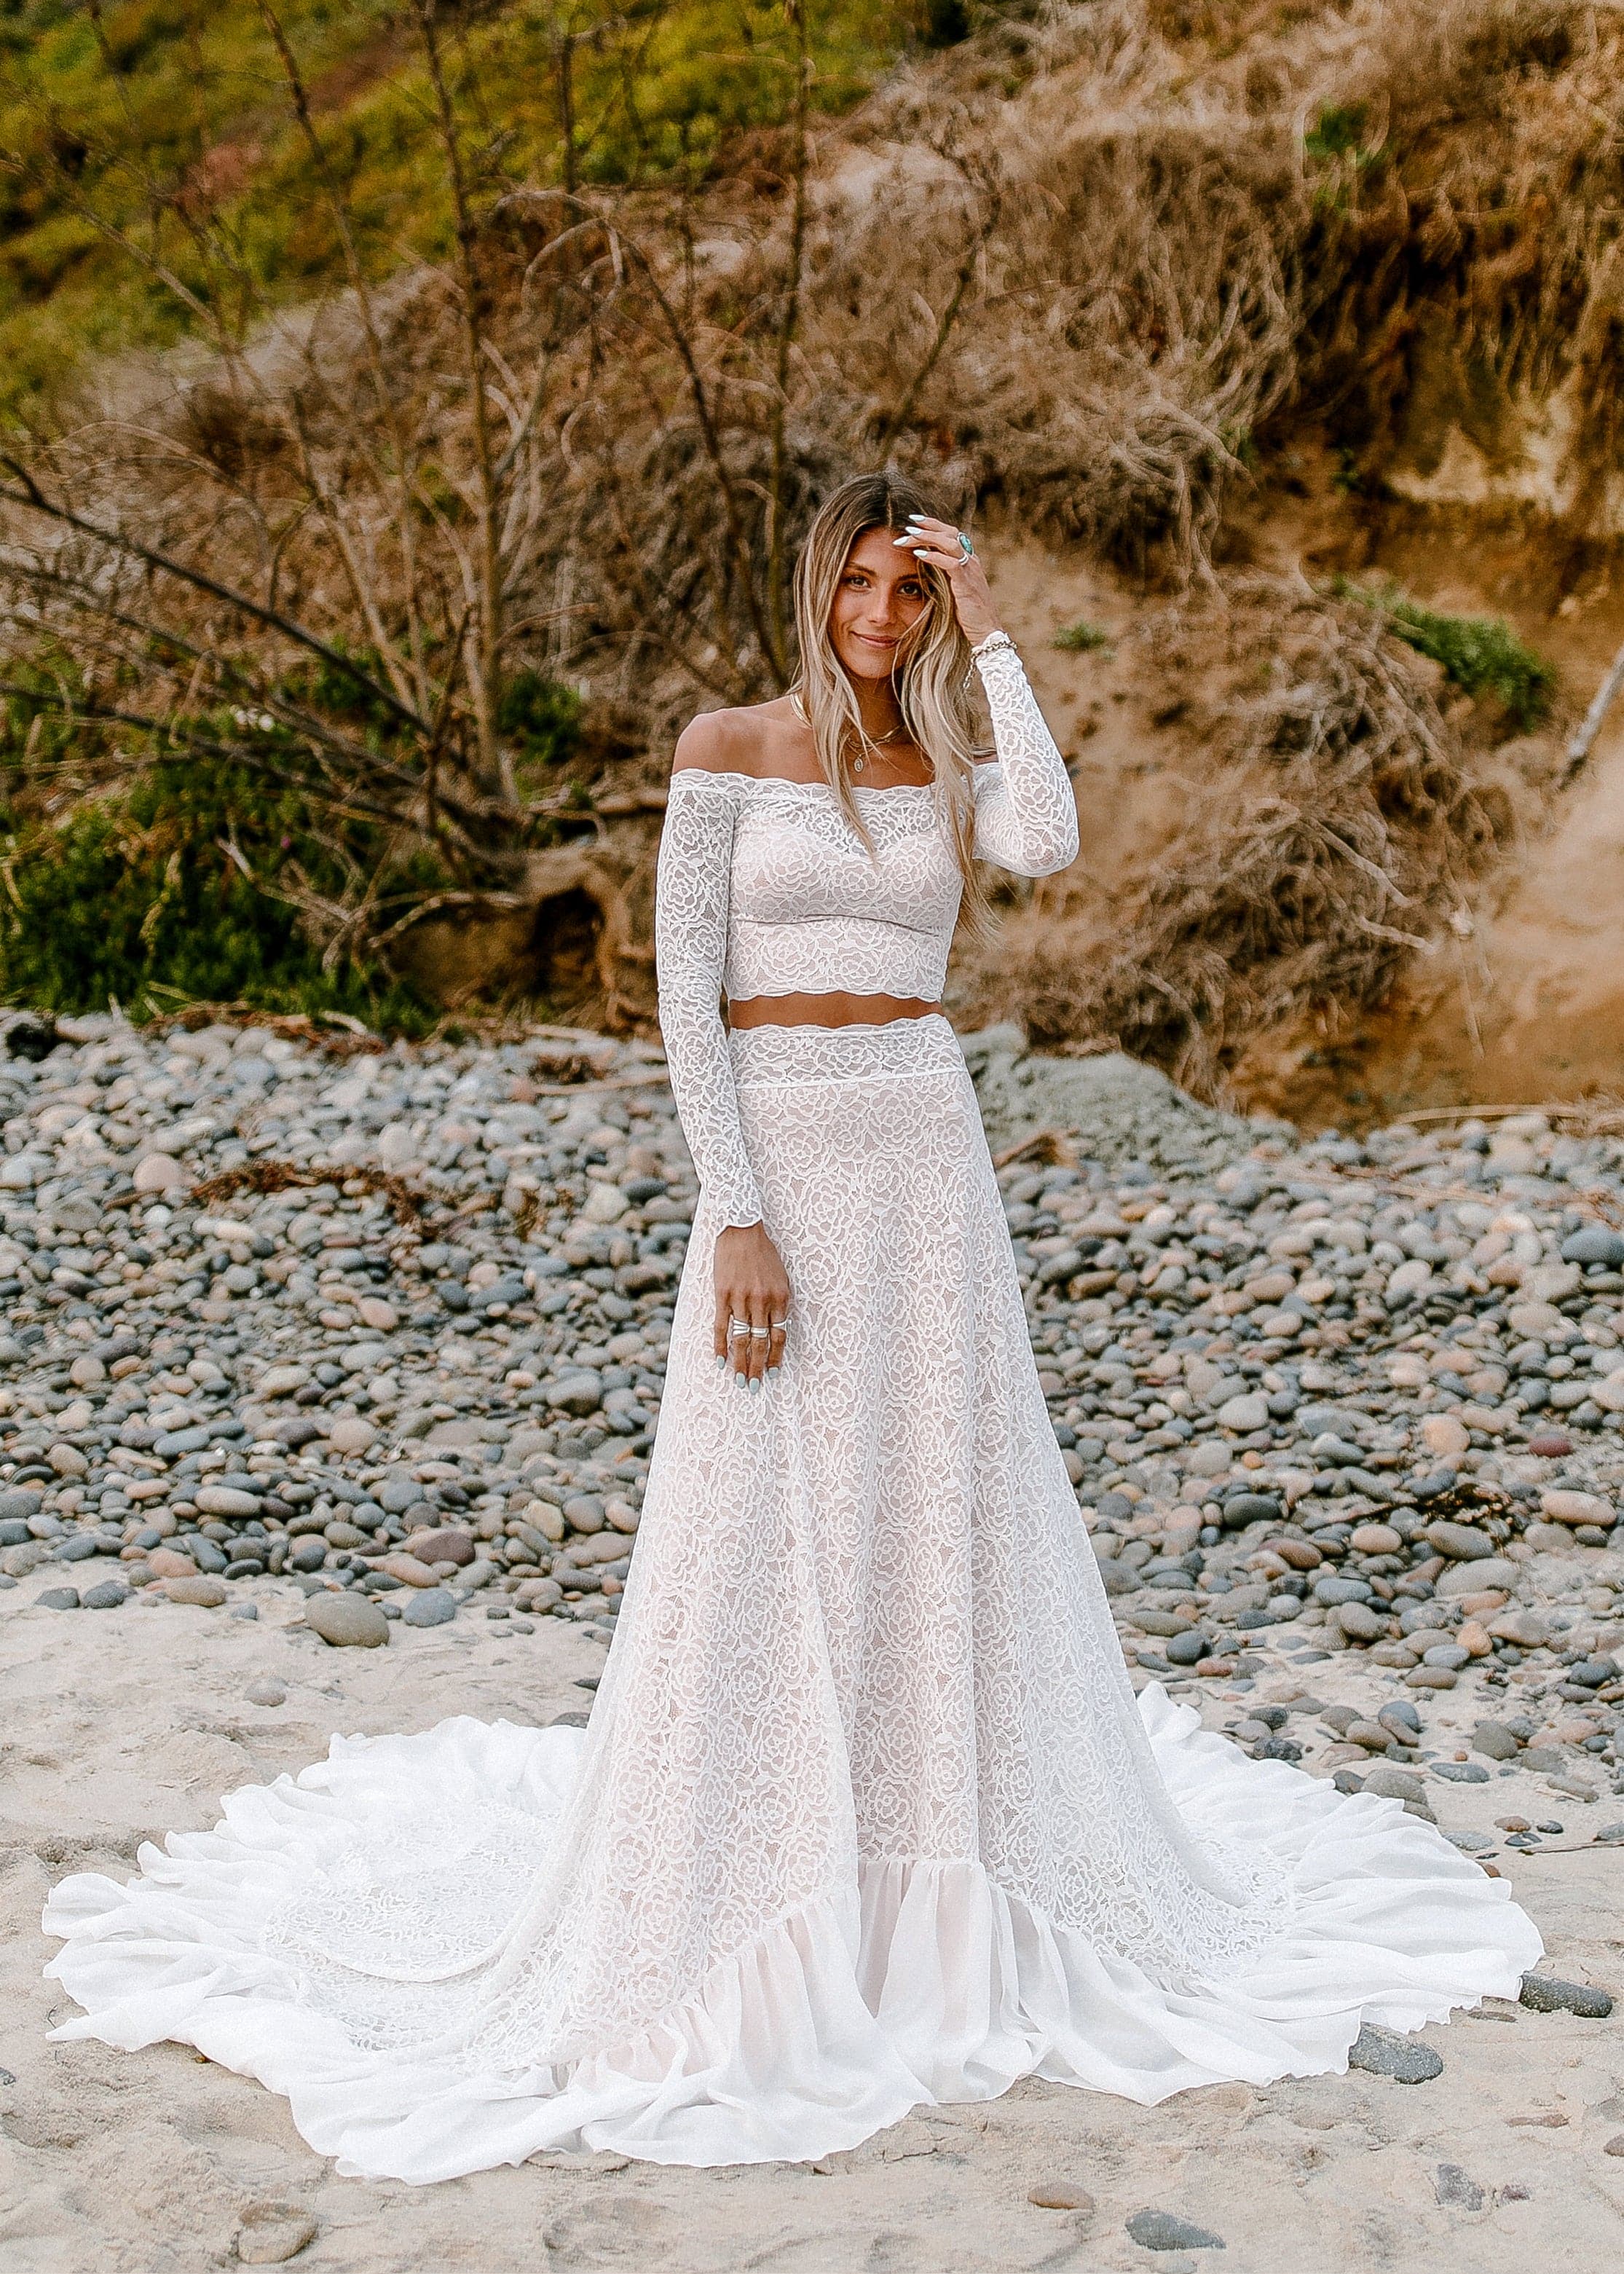 Boho Lace Two Piece Boho Lace Wedding Dress With Crop Top And